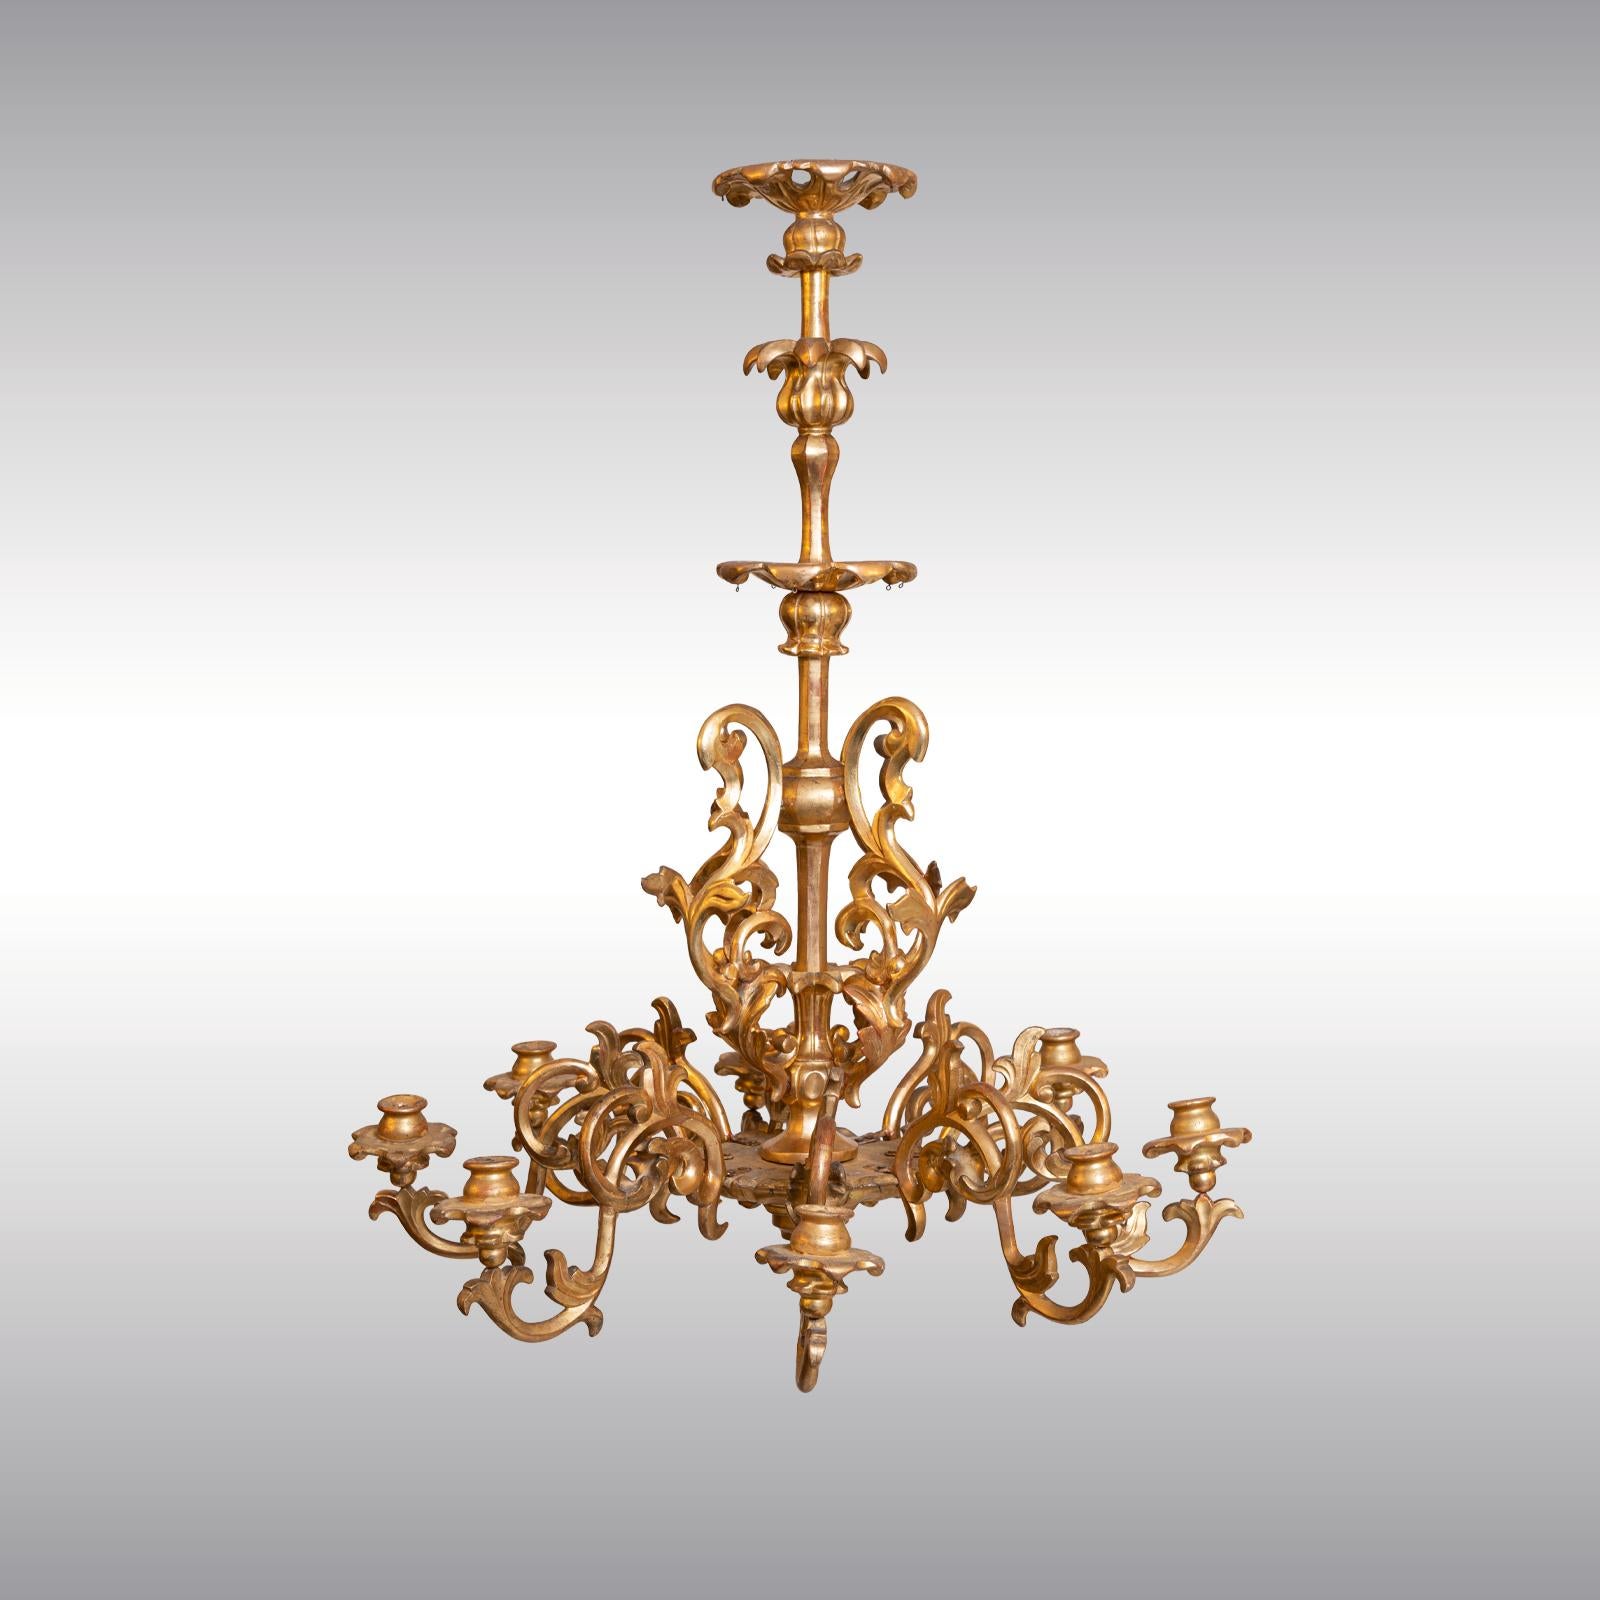 Austrian Original Maria Theresien Rococo Chandelier, Leaf Gilded, Newly Restored For Sale